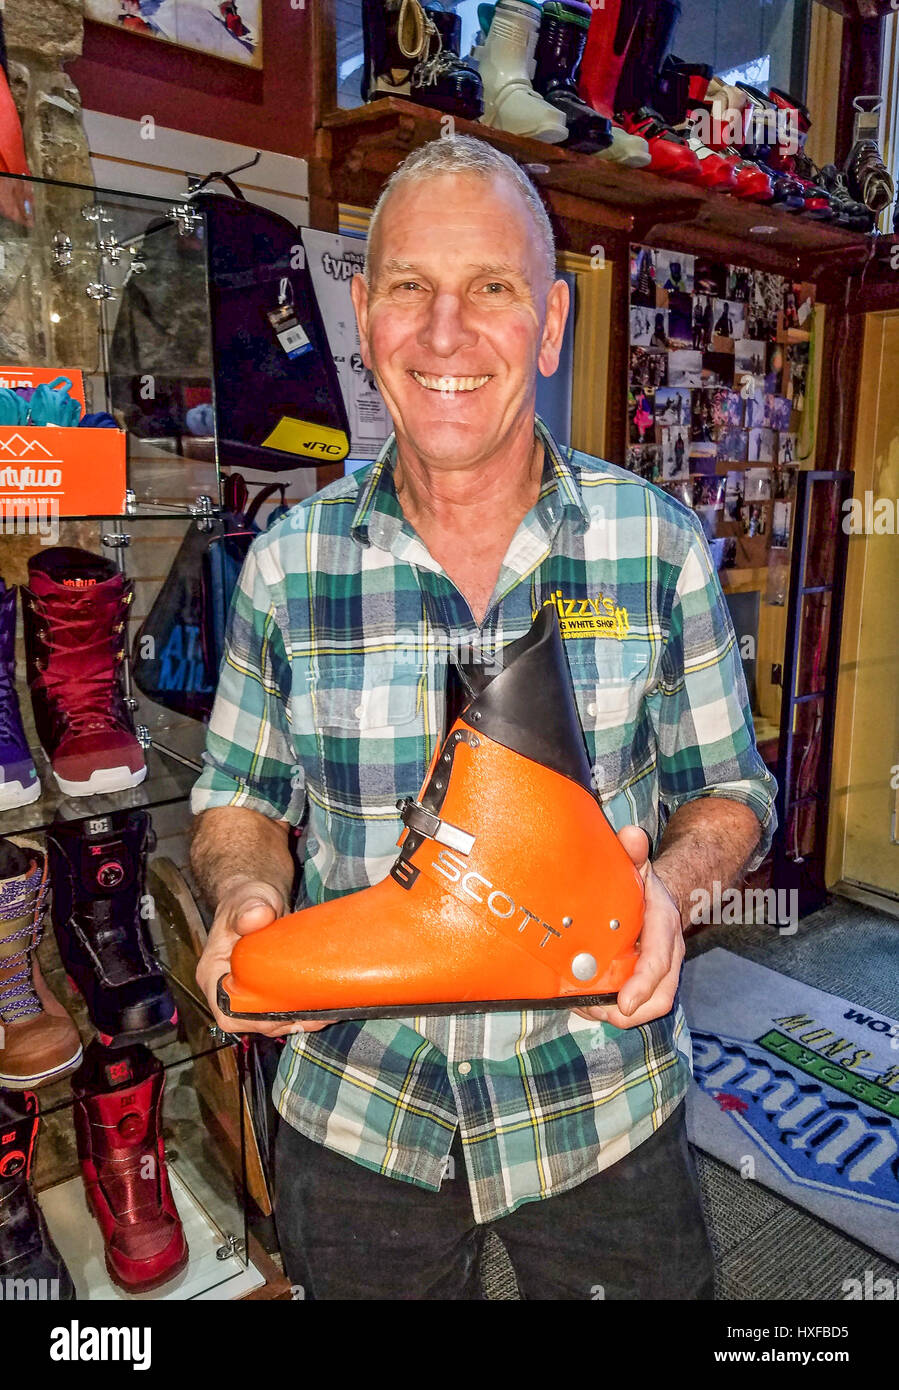 Dizzy of Dizzy's boot fitting shop at Big White ski resort shows off an early 1970s ski boot that boasted fantastic ski technology that, sadly, was ah Stock Photo